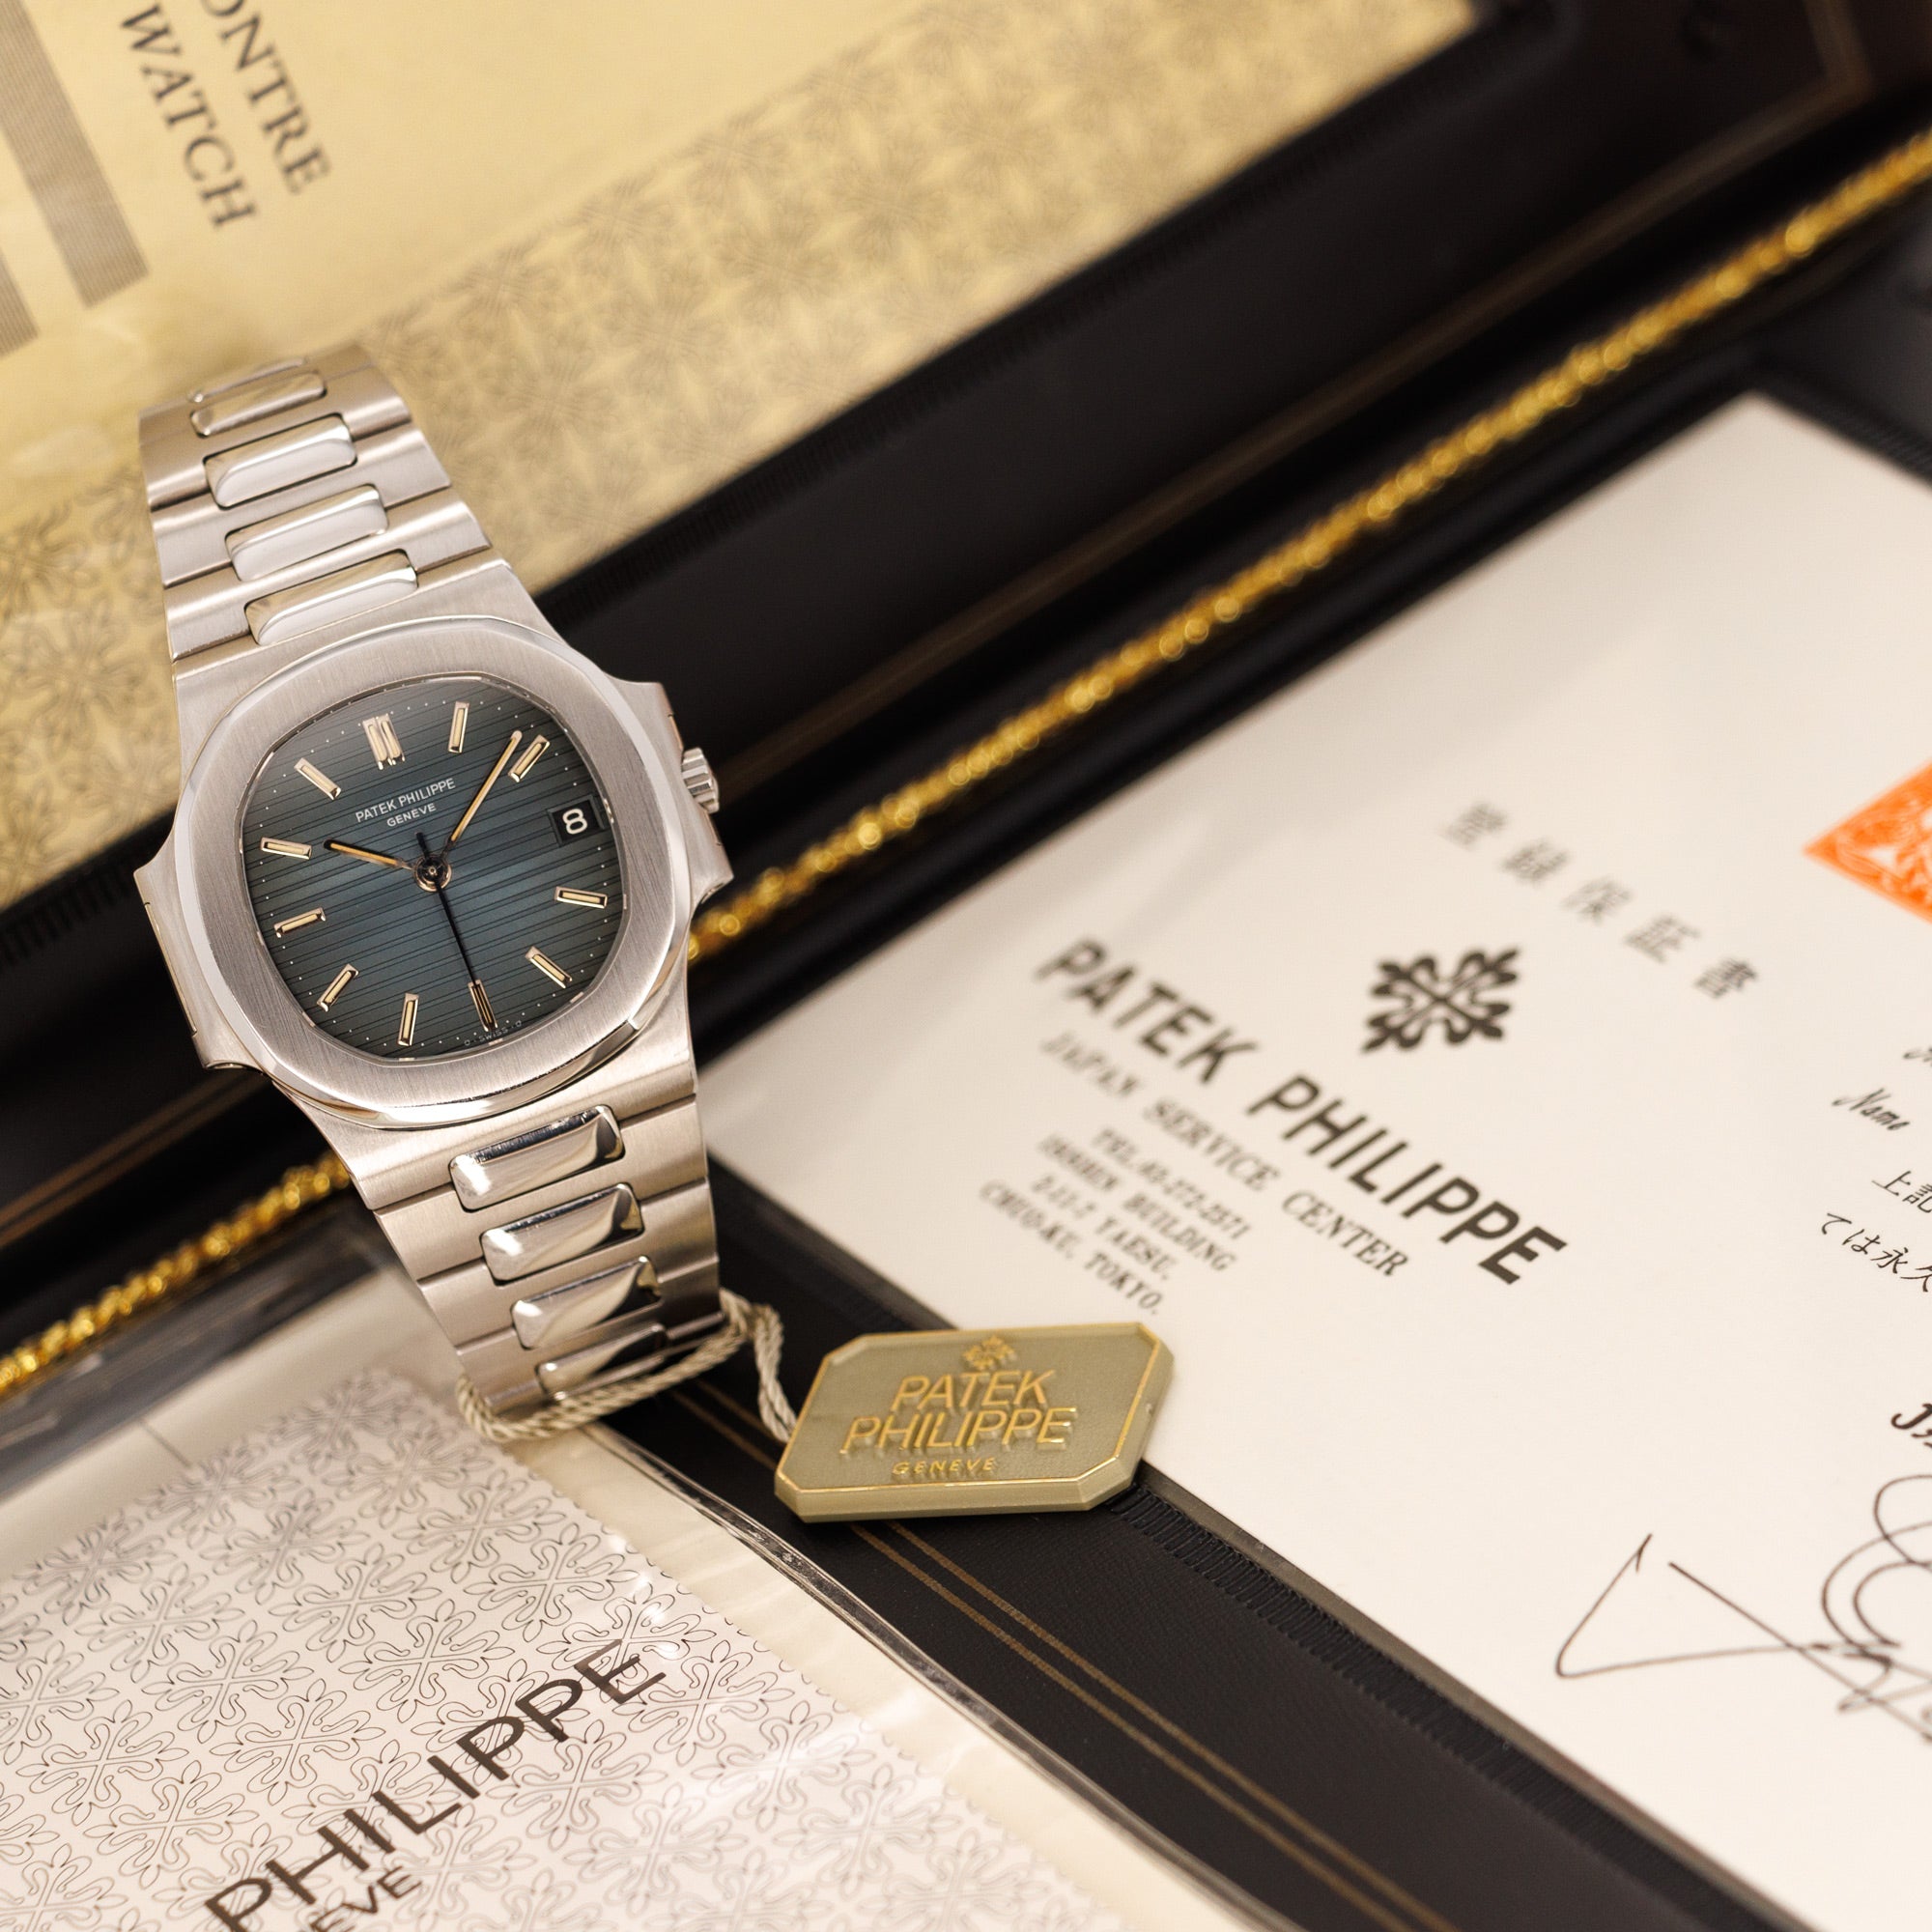 Patek Philippe - Patek Philippe Nautilus Watch Ref. 3800 with Box and Papers - The Keystone Watches